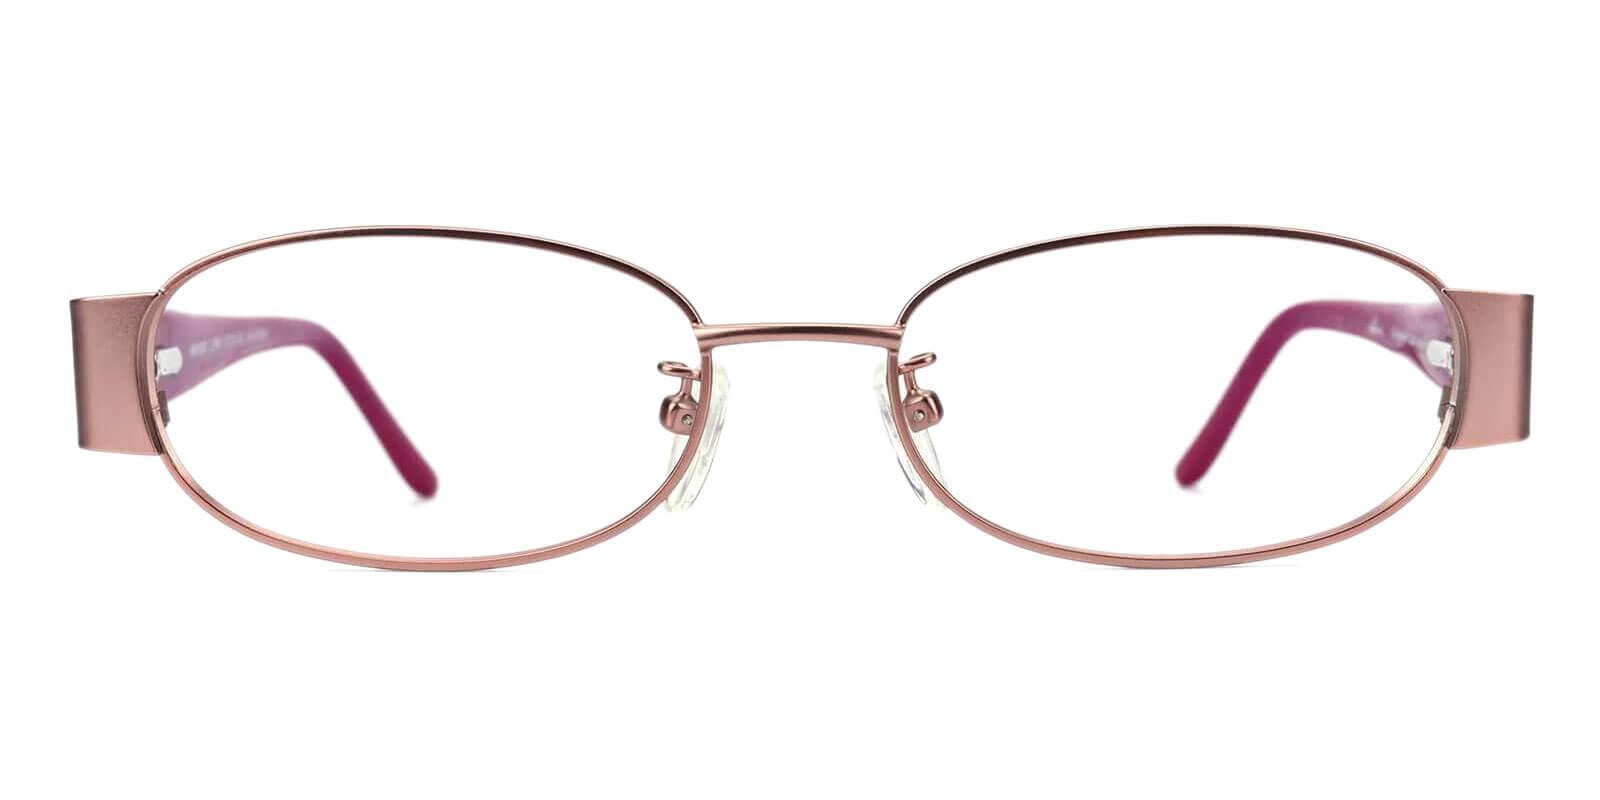 Alps Pink Metal Eyeglasses , NosePads Frames from ABBE Glasses